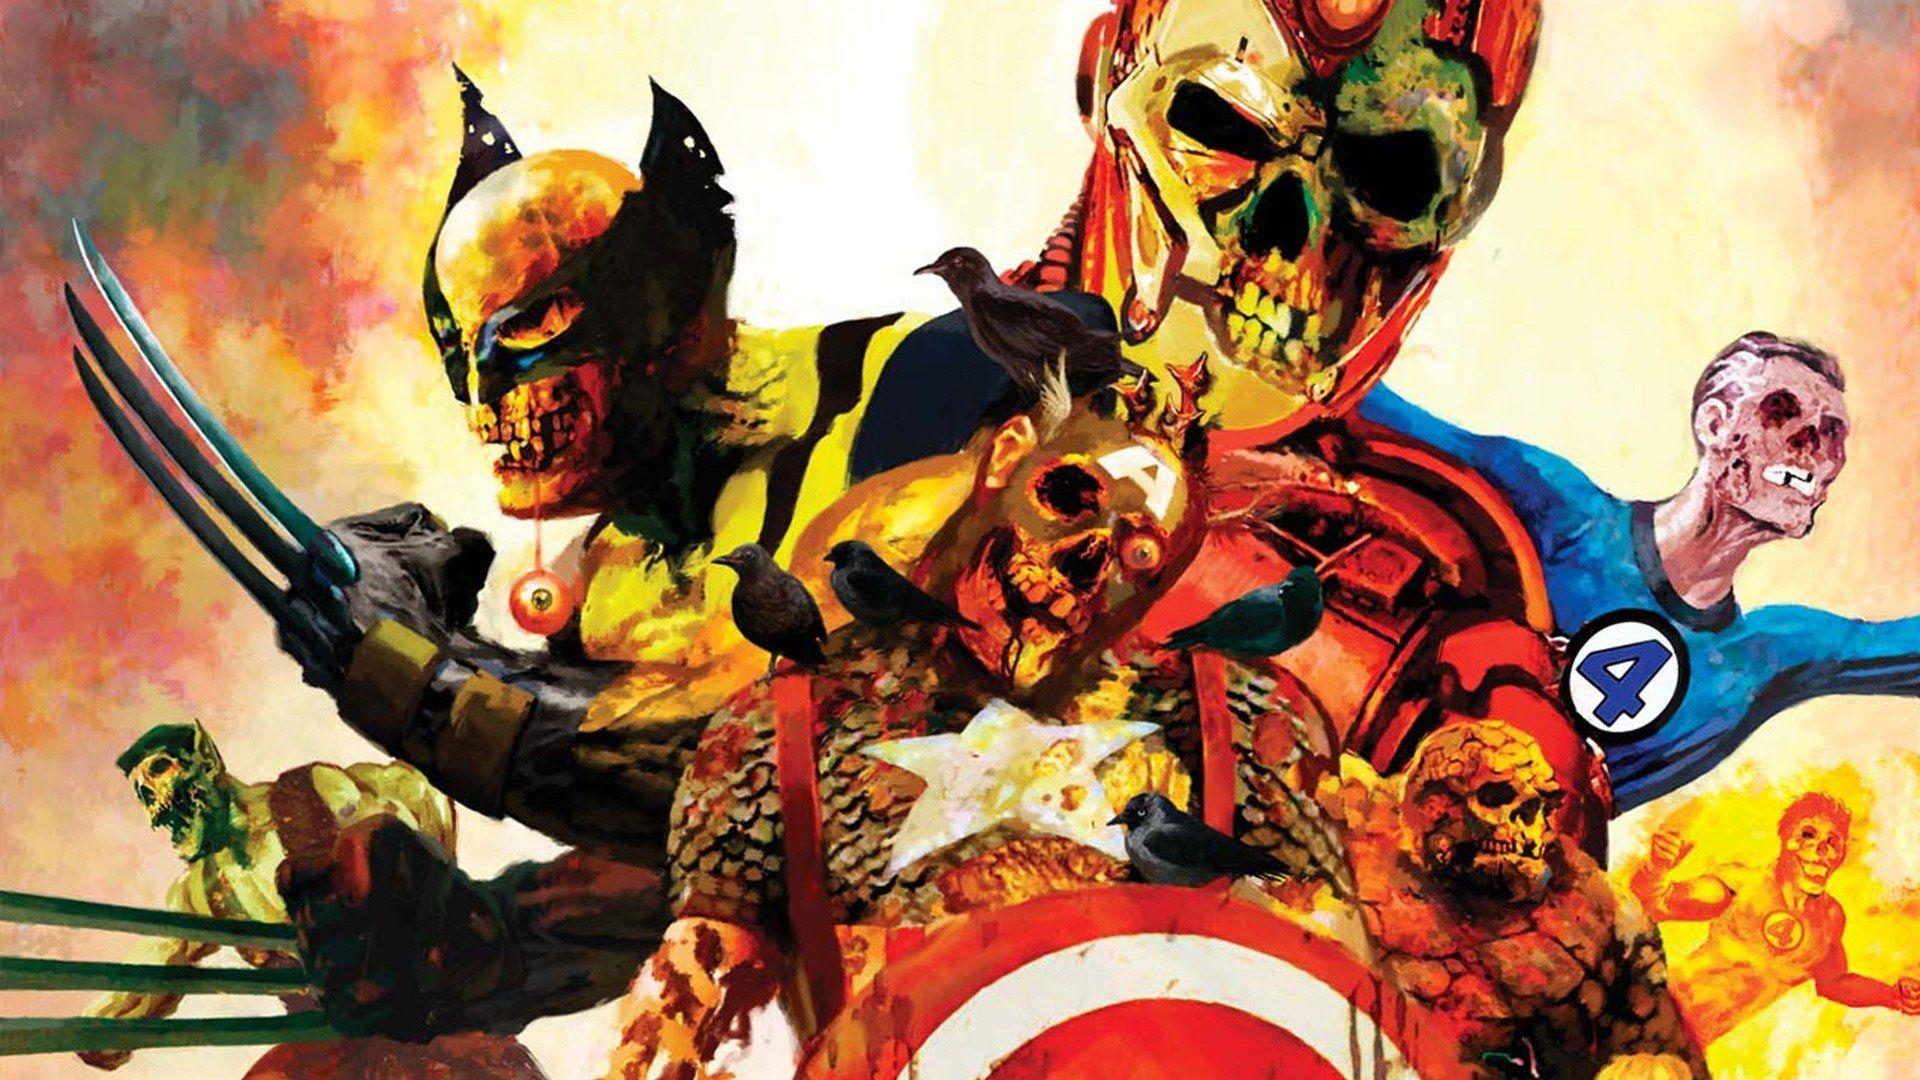 Marvel Zombies Wallpapers HD - Wallpaper Cave.